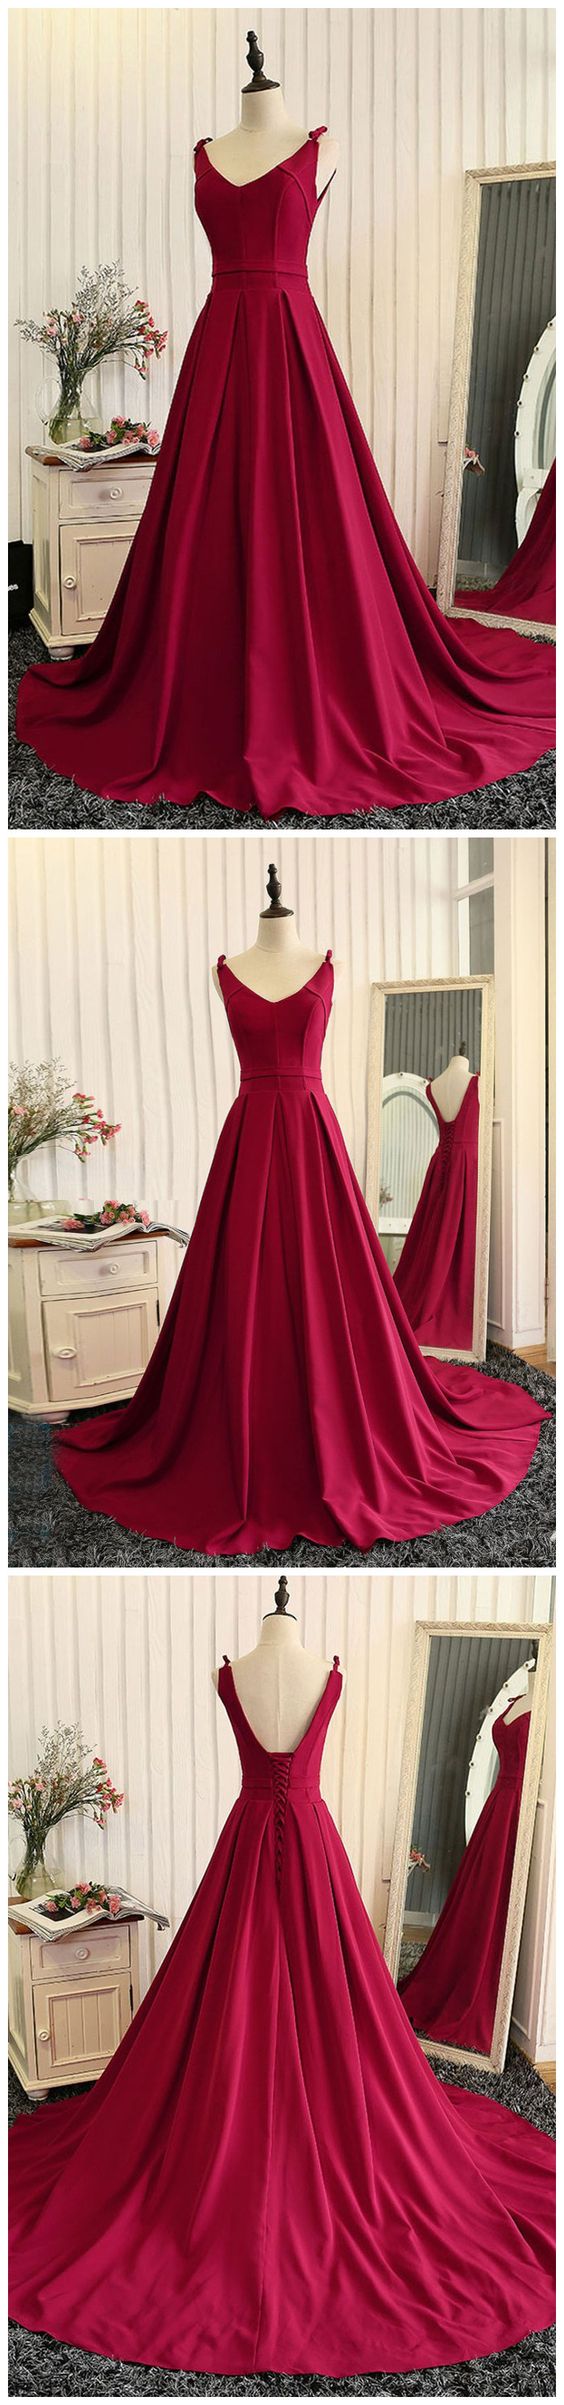 Simple Red Prom Dress V-neck Satin Evening Gown